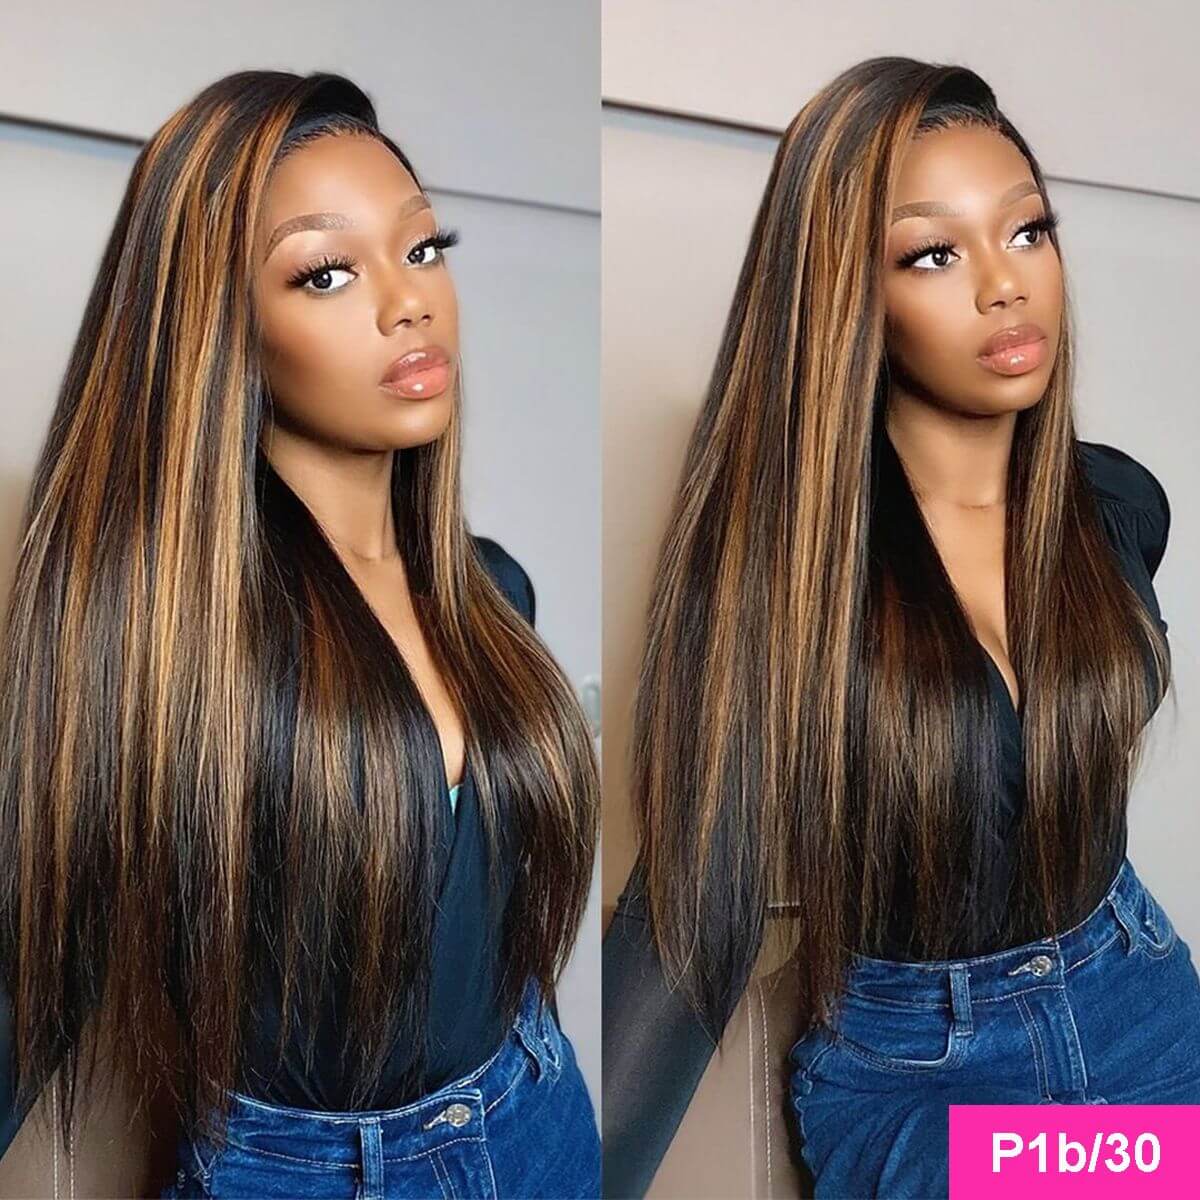 highlight straight front wigs,4/27 straight front wig,4/27 straight lace frontal wigs,4/27 lace frontal wigs,4/30 straight hair front wig,4/30 straight hair front wig,ombre color wig